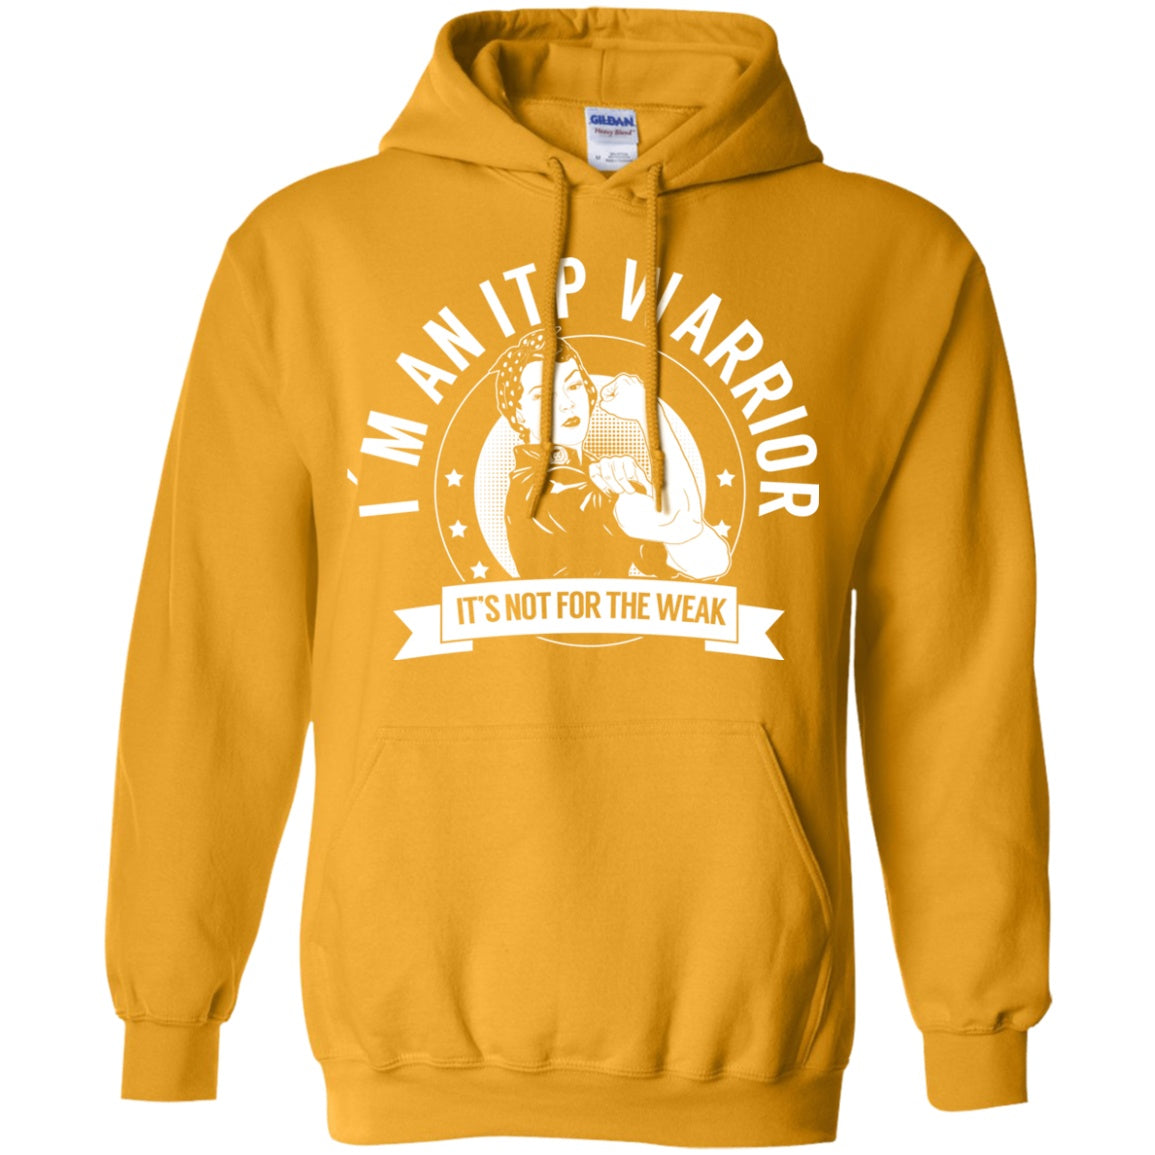 Immune Thrombocytopenic Purpura - ITP Warrior NFTW Pullover Hoodie 8 oz. - The Unchargeables